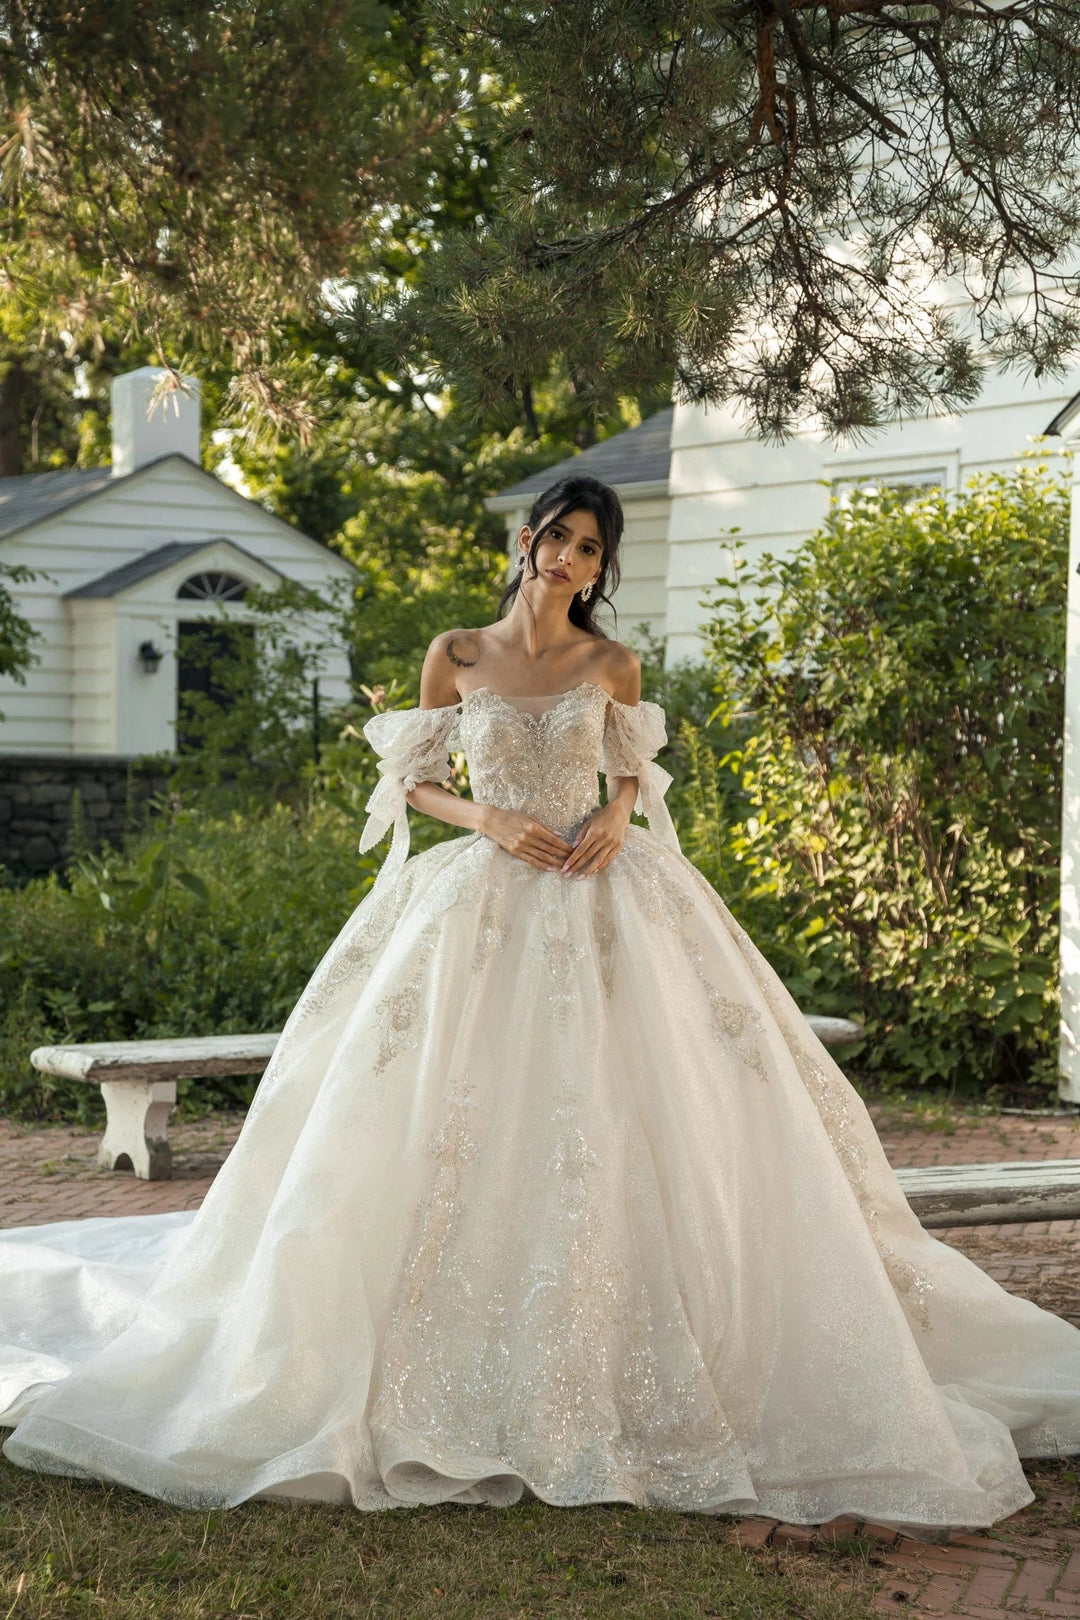 Wedding Dresses For Broad Shoulders, Wedding Gowns For Wide